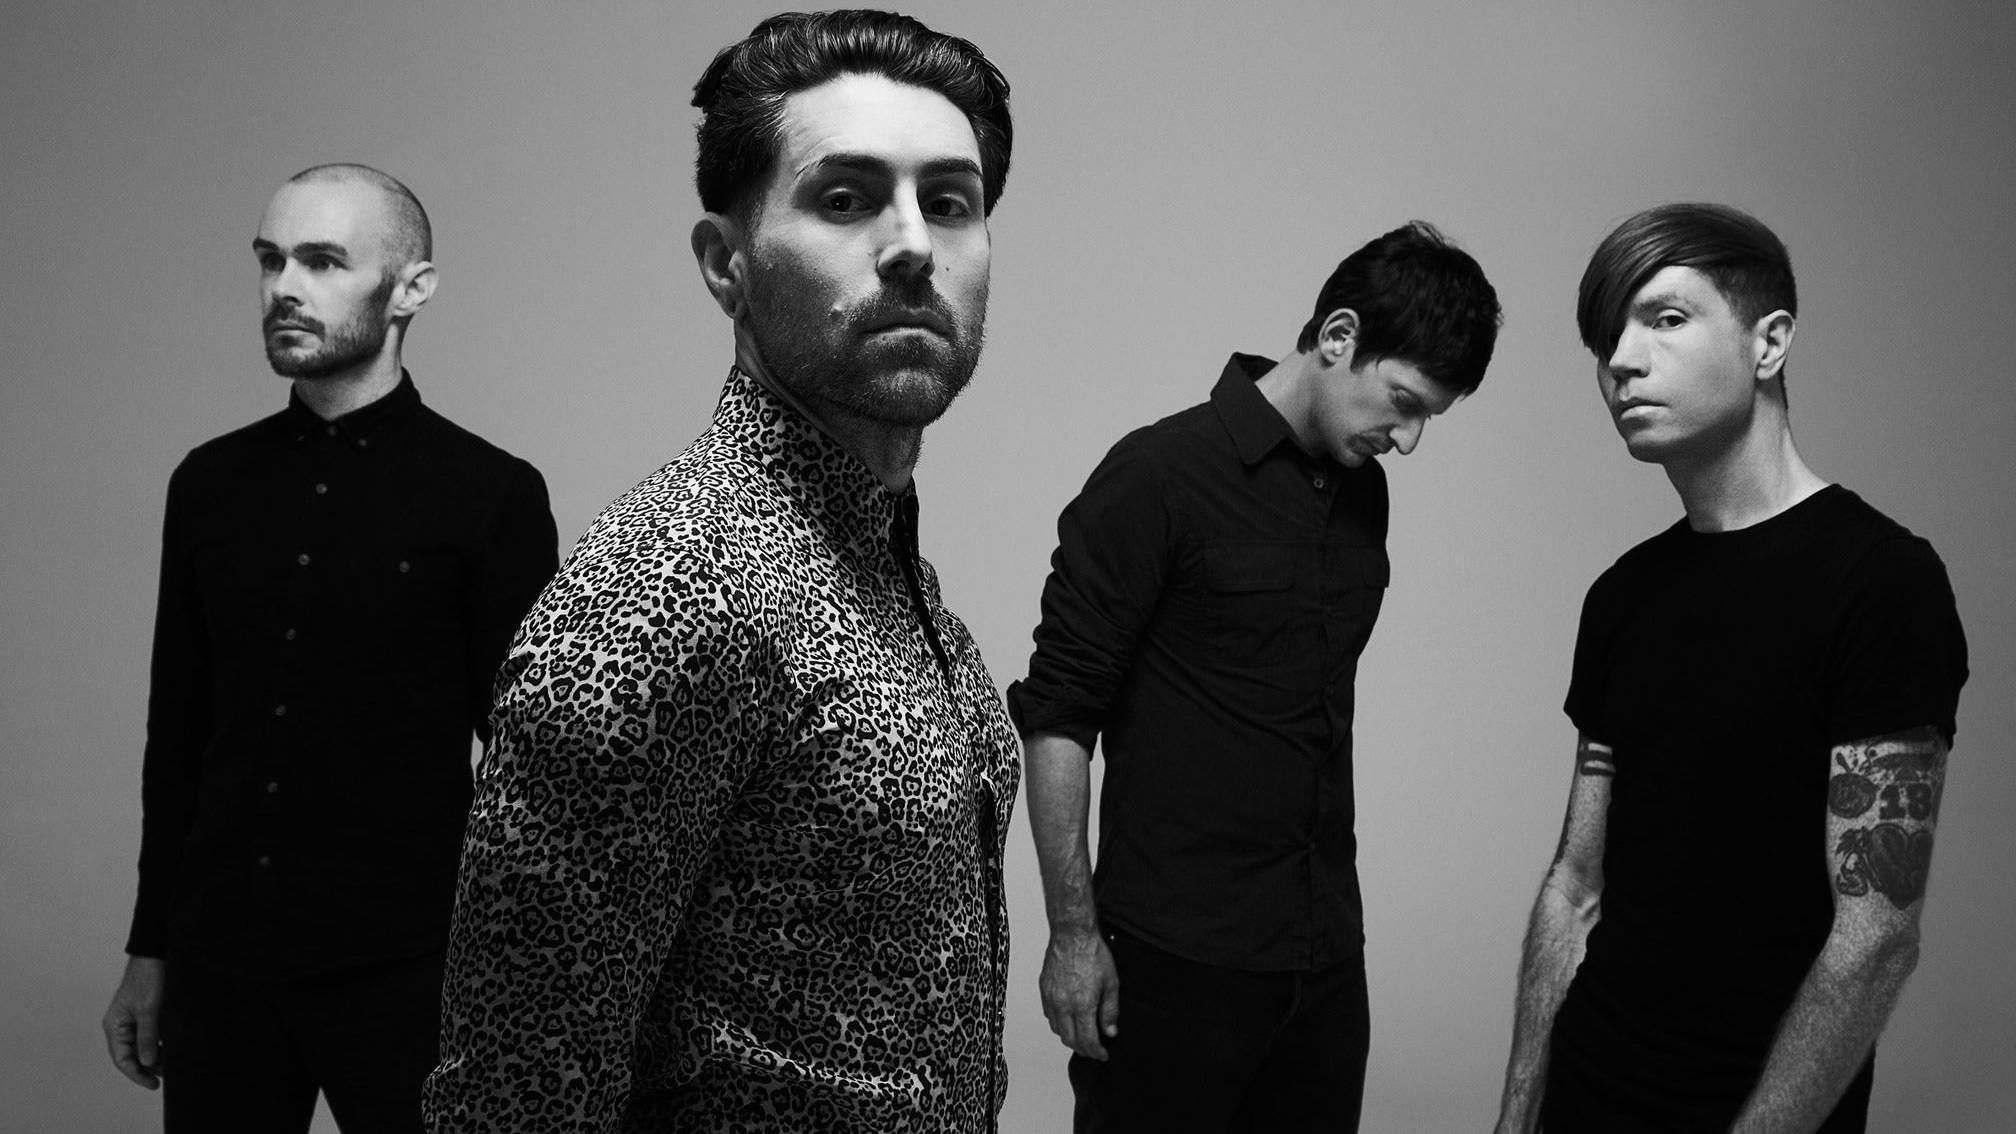 AFI are teasing a new single for this Friday